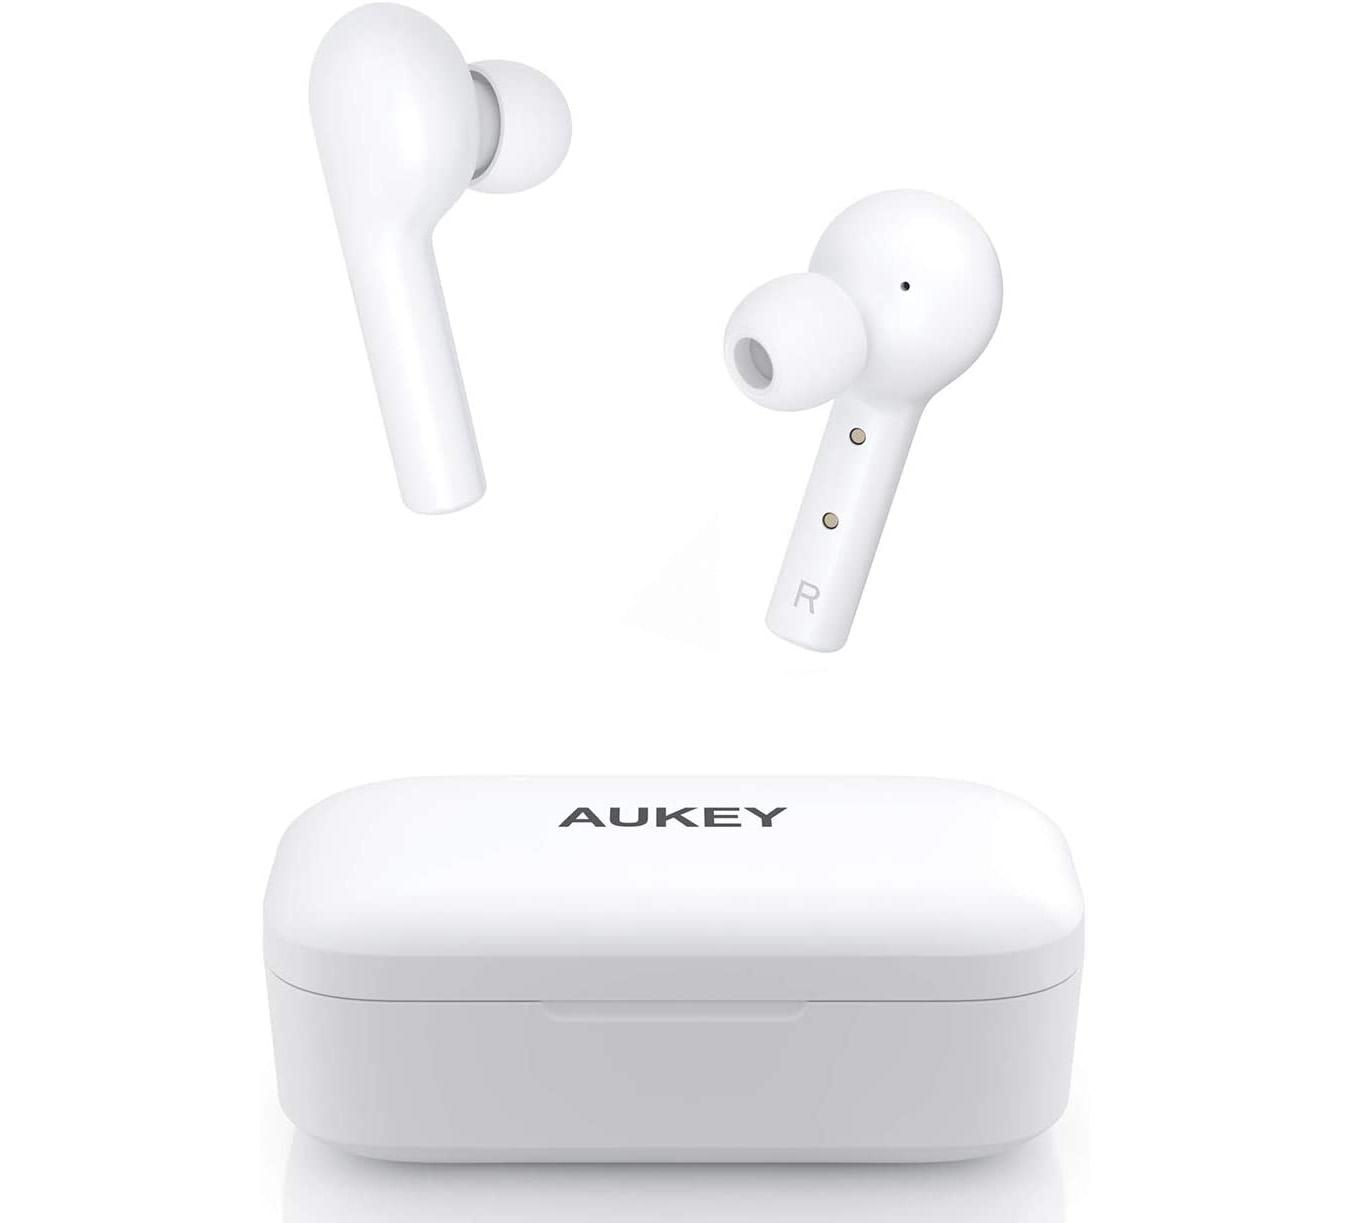 Aukey True Bluetooth Earbuds for $20.99 Shipped